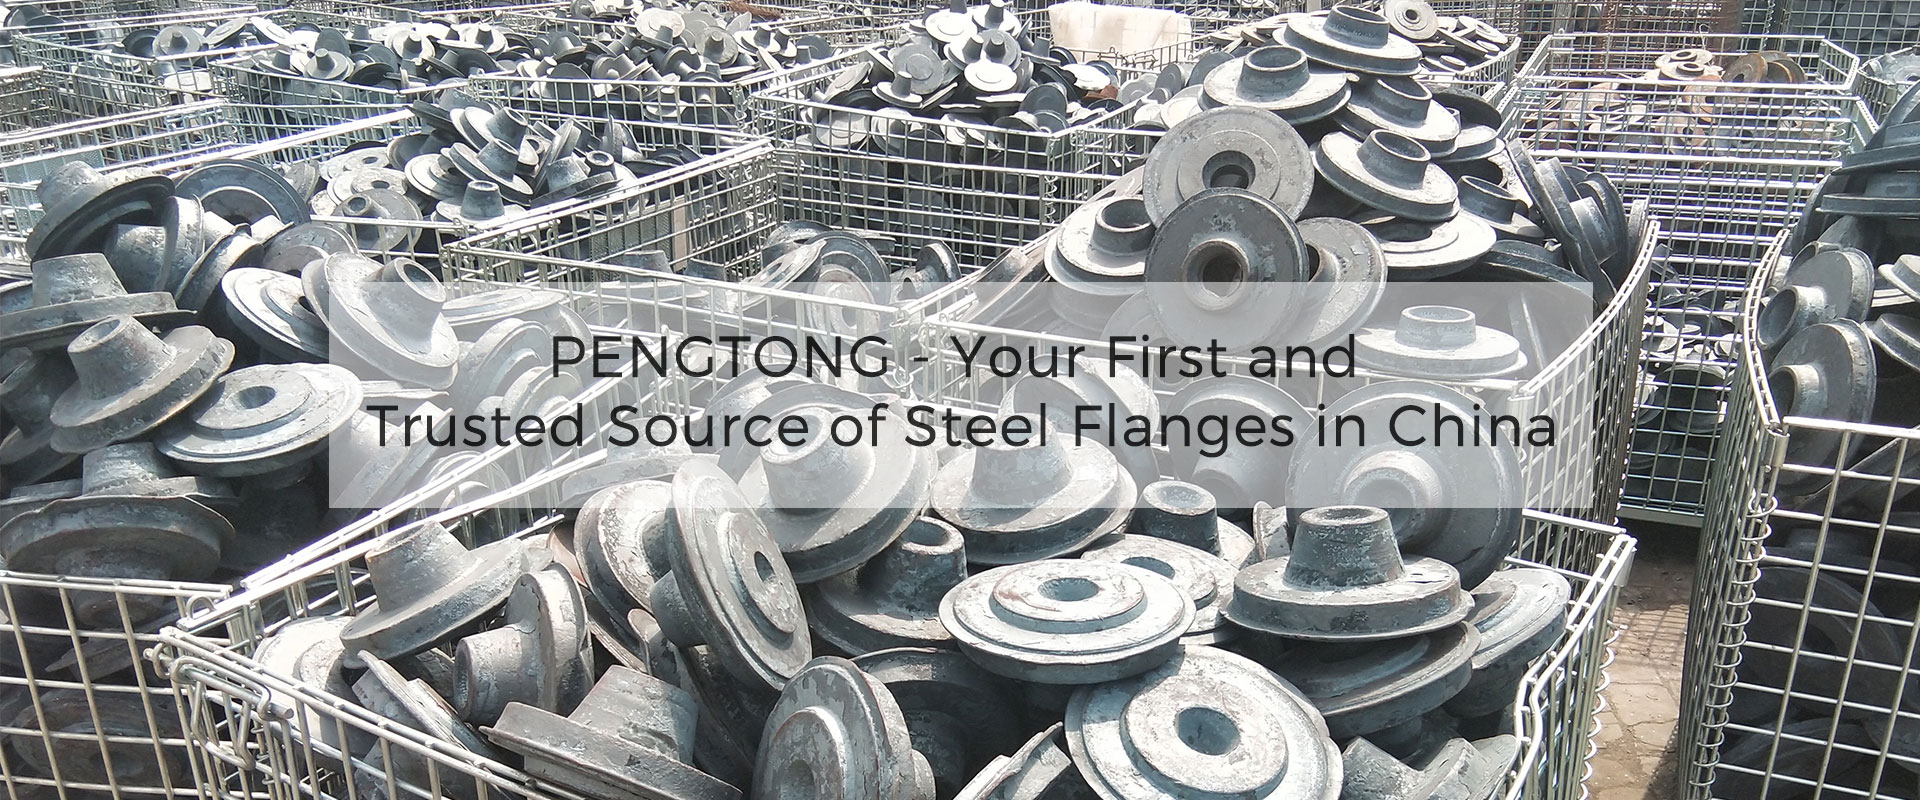 CANGZHOU PENGTONG PIPE FITTING MANUFACTURING CO., LTD is your first and trusted source of steel flanges in China